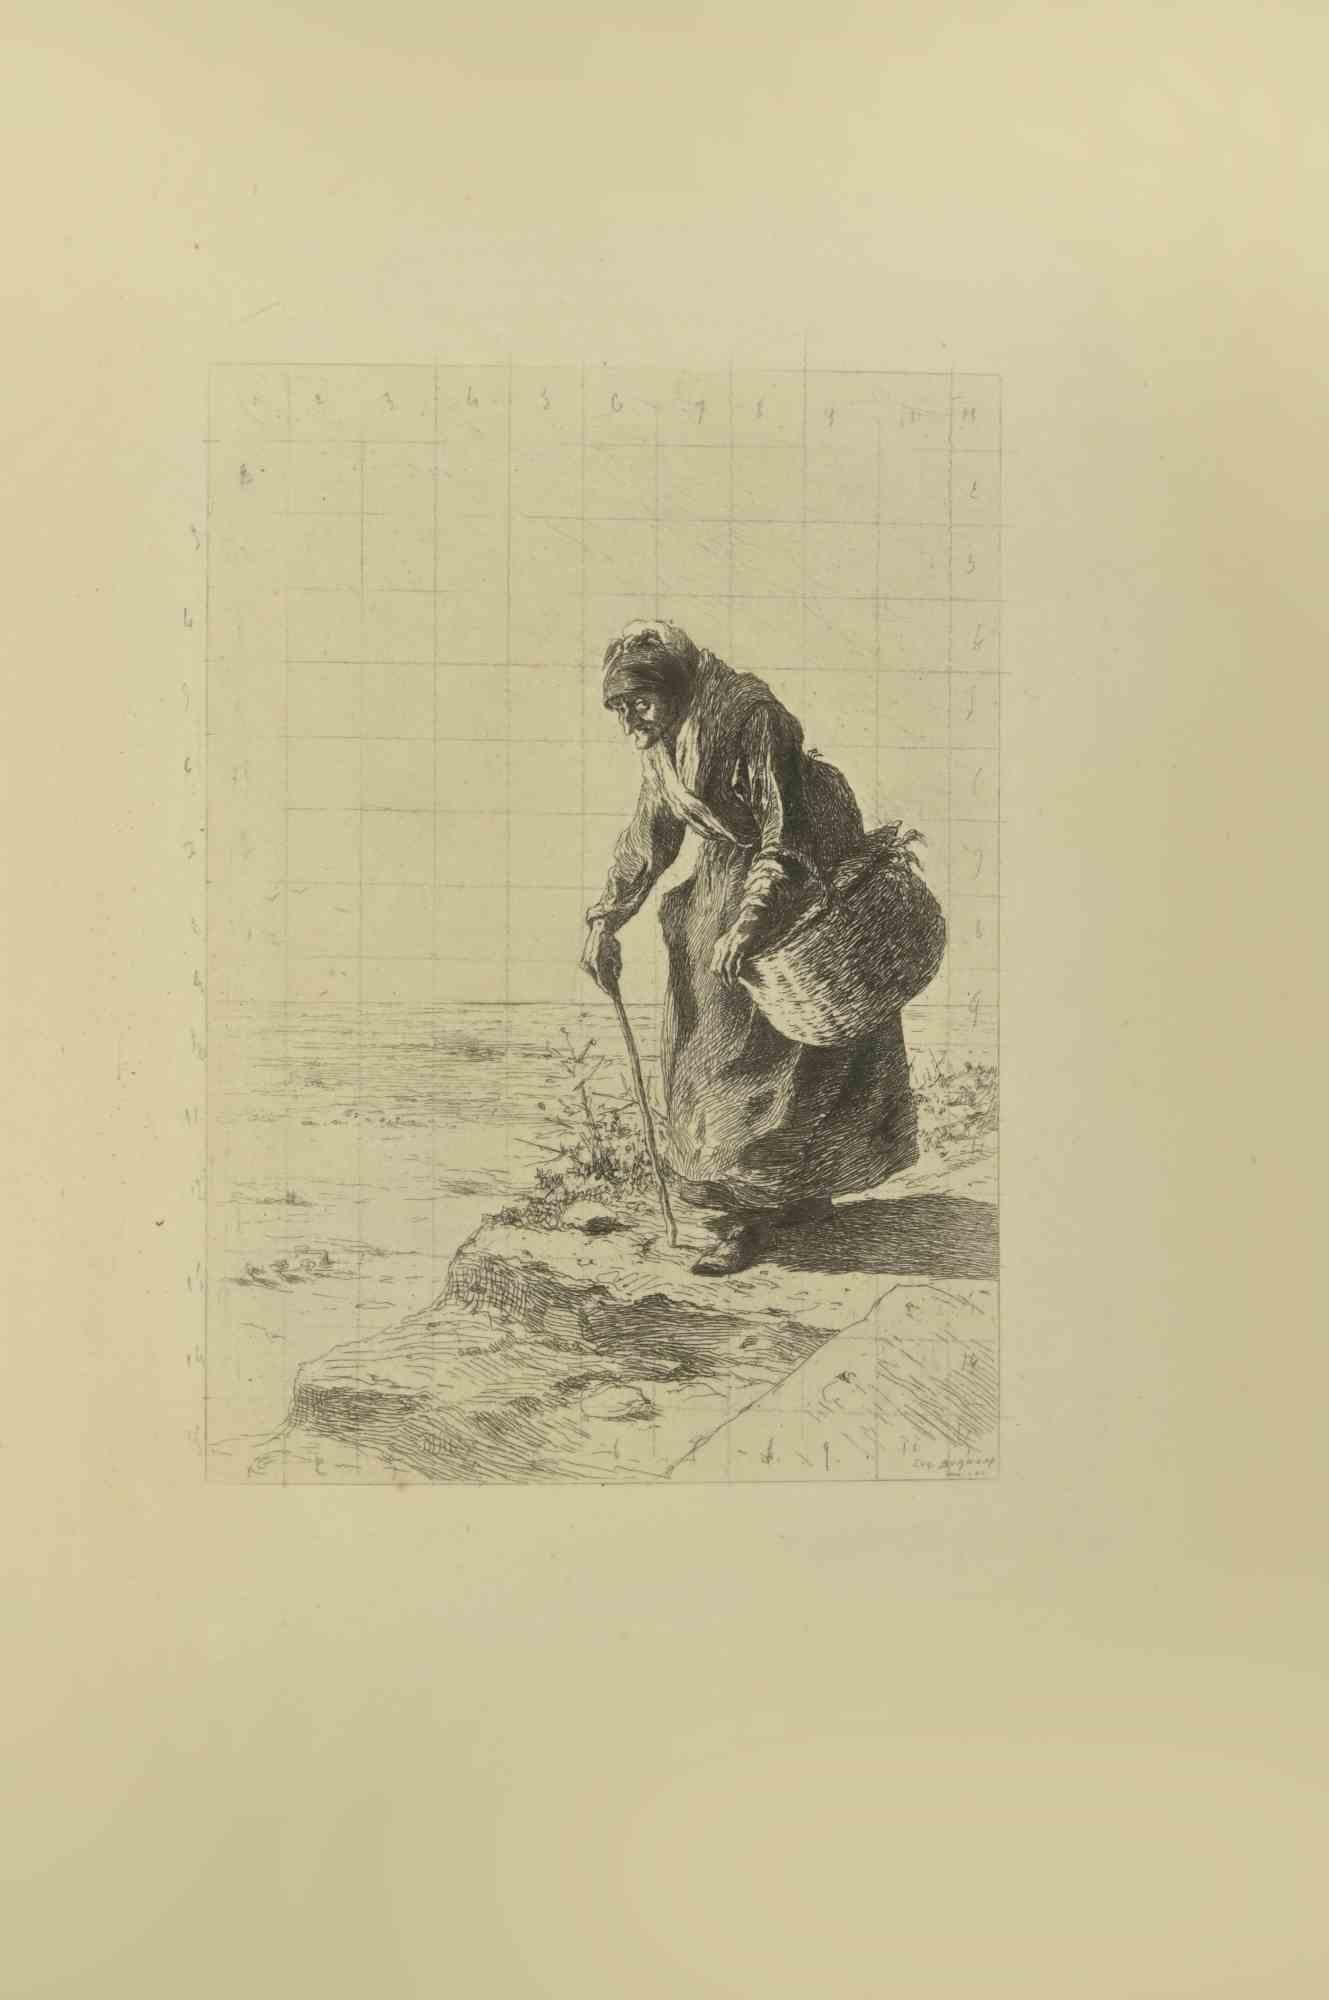 Old Woman with Stick - Etching by Eugène Burnand - Late 19th century